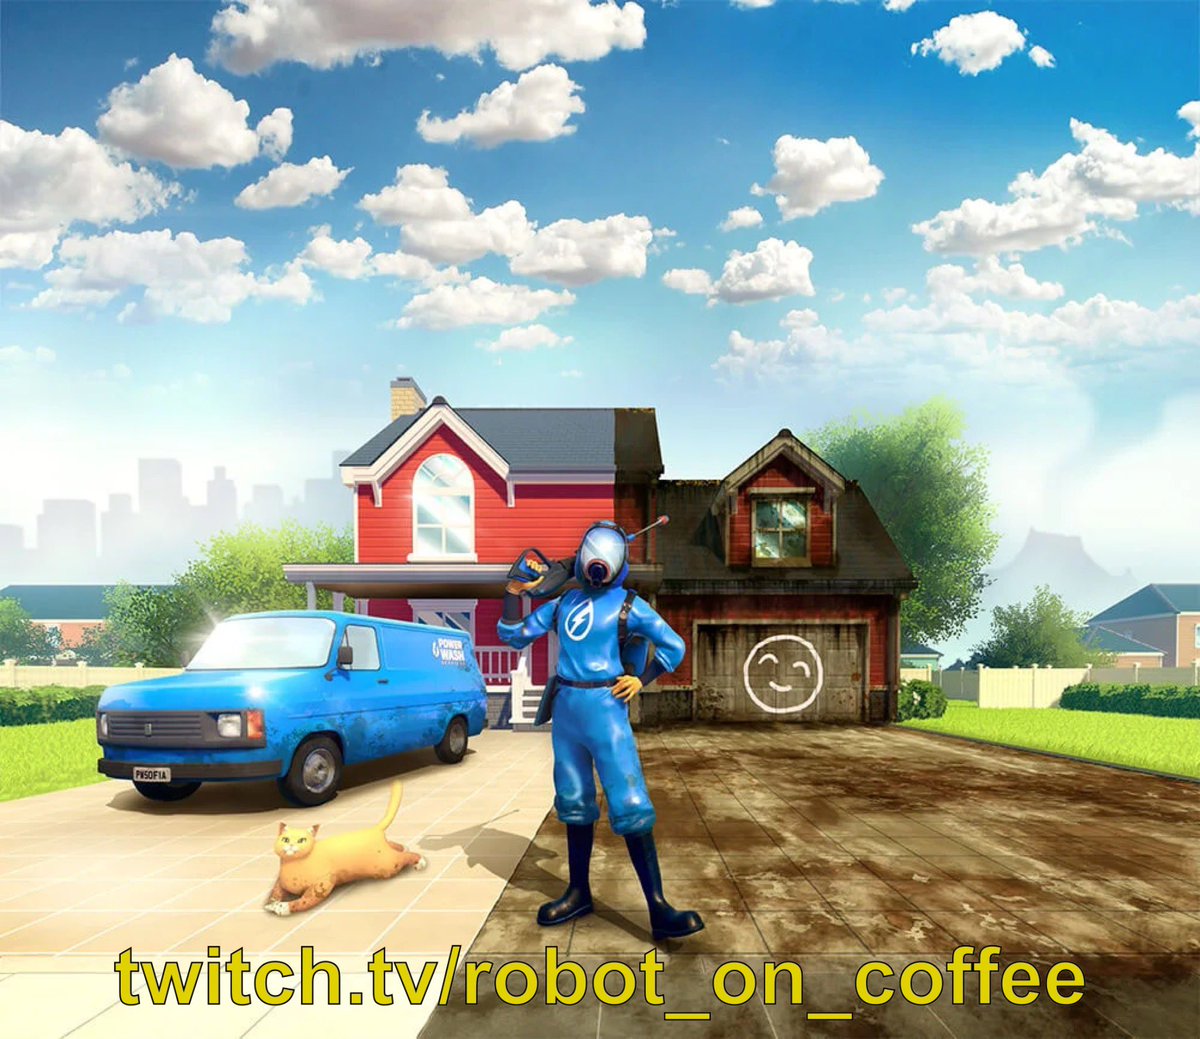 Chilling out streaming Power Wash Simulator!